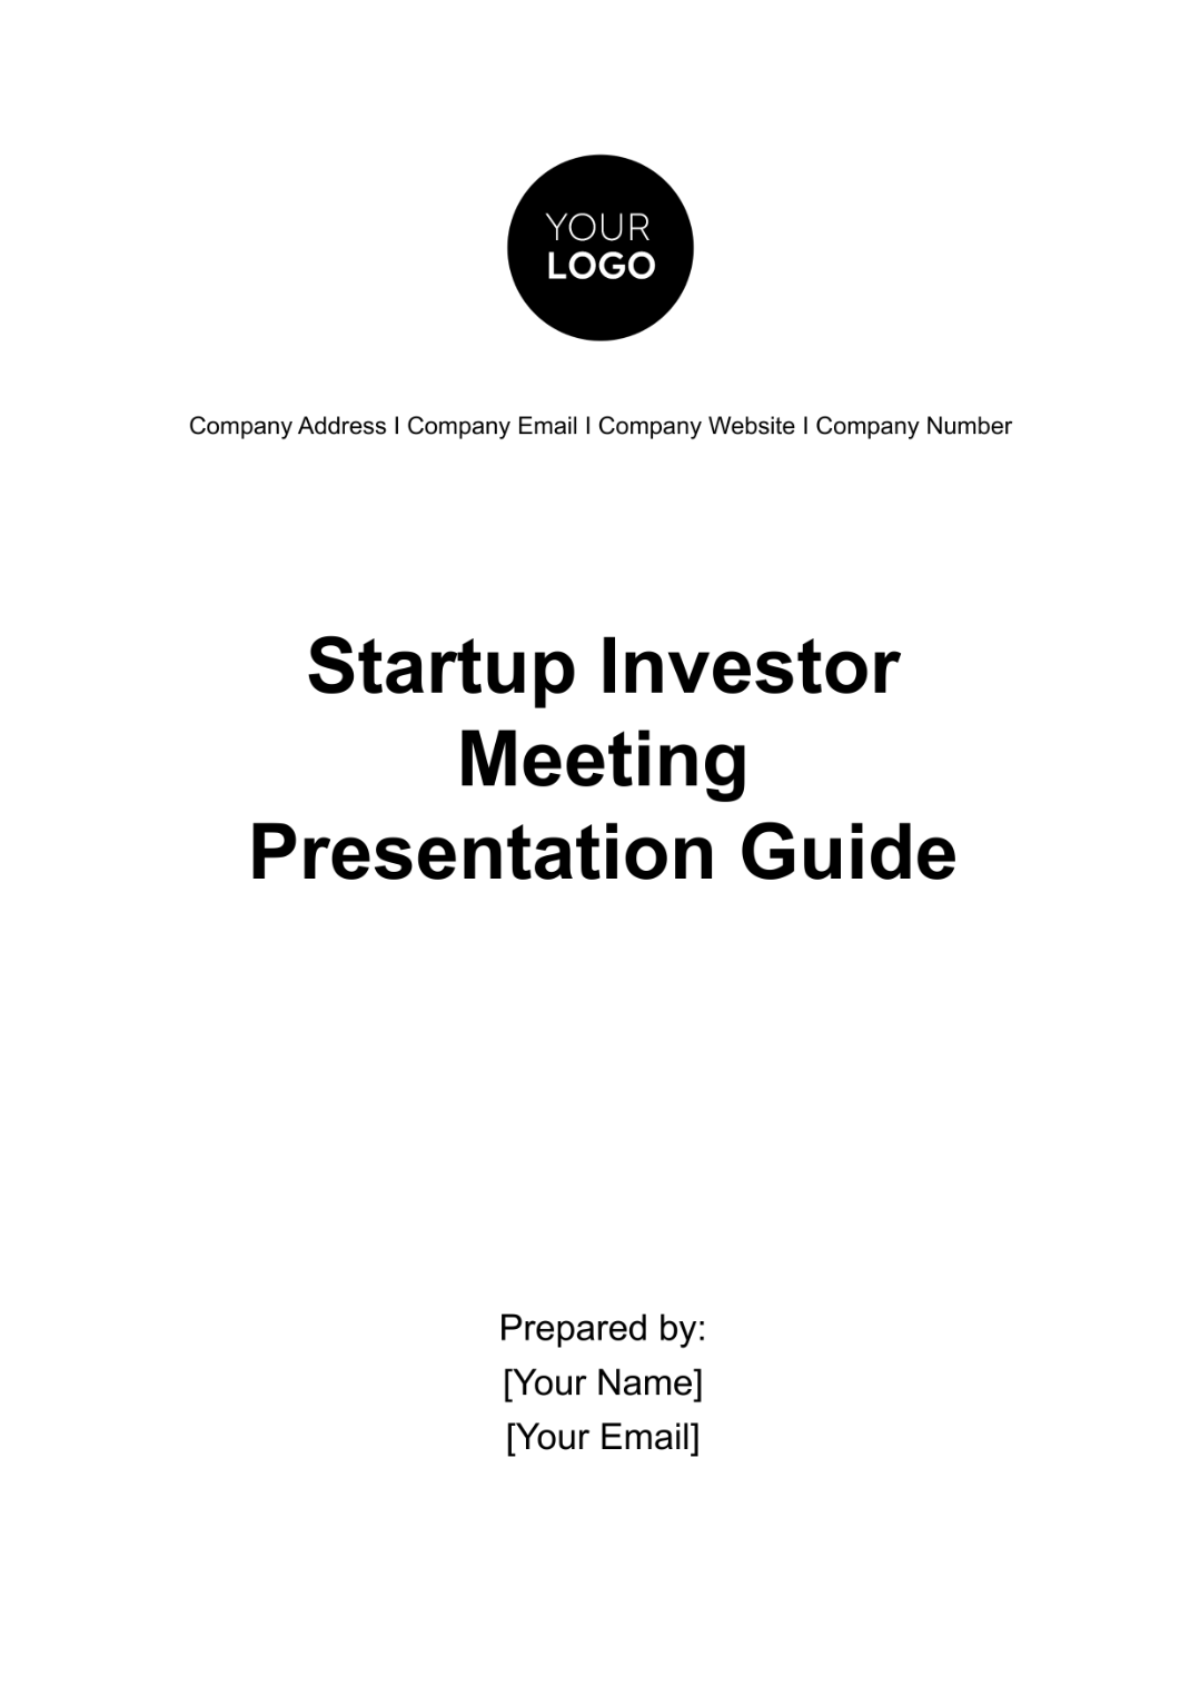 Startup Investor Meeting Presentation Guide Template